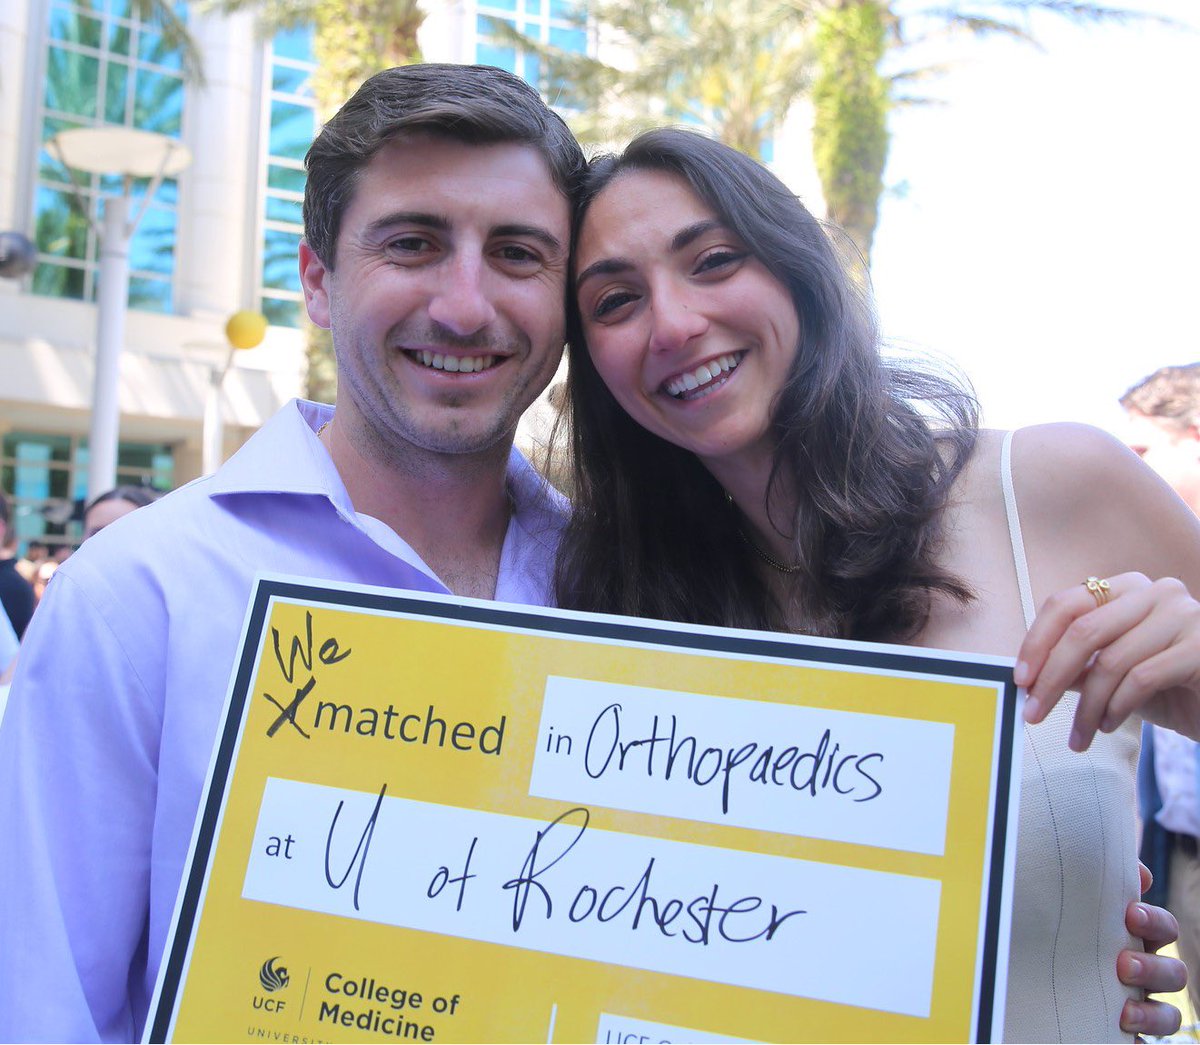 My fiance + I will both be orthopaedic surgery residents at the University of Rochester! Couldn’t have done this without endless support and community! Taking ANY advice on how to survive the cold!! 
#match2024 #orthomatch #couplesmatch #orthotwitter #medtwitter #ortho #residency